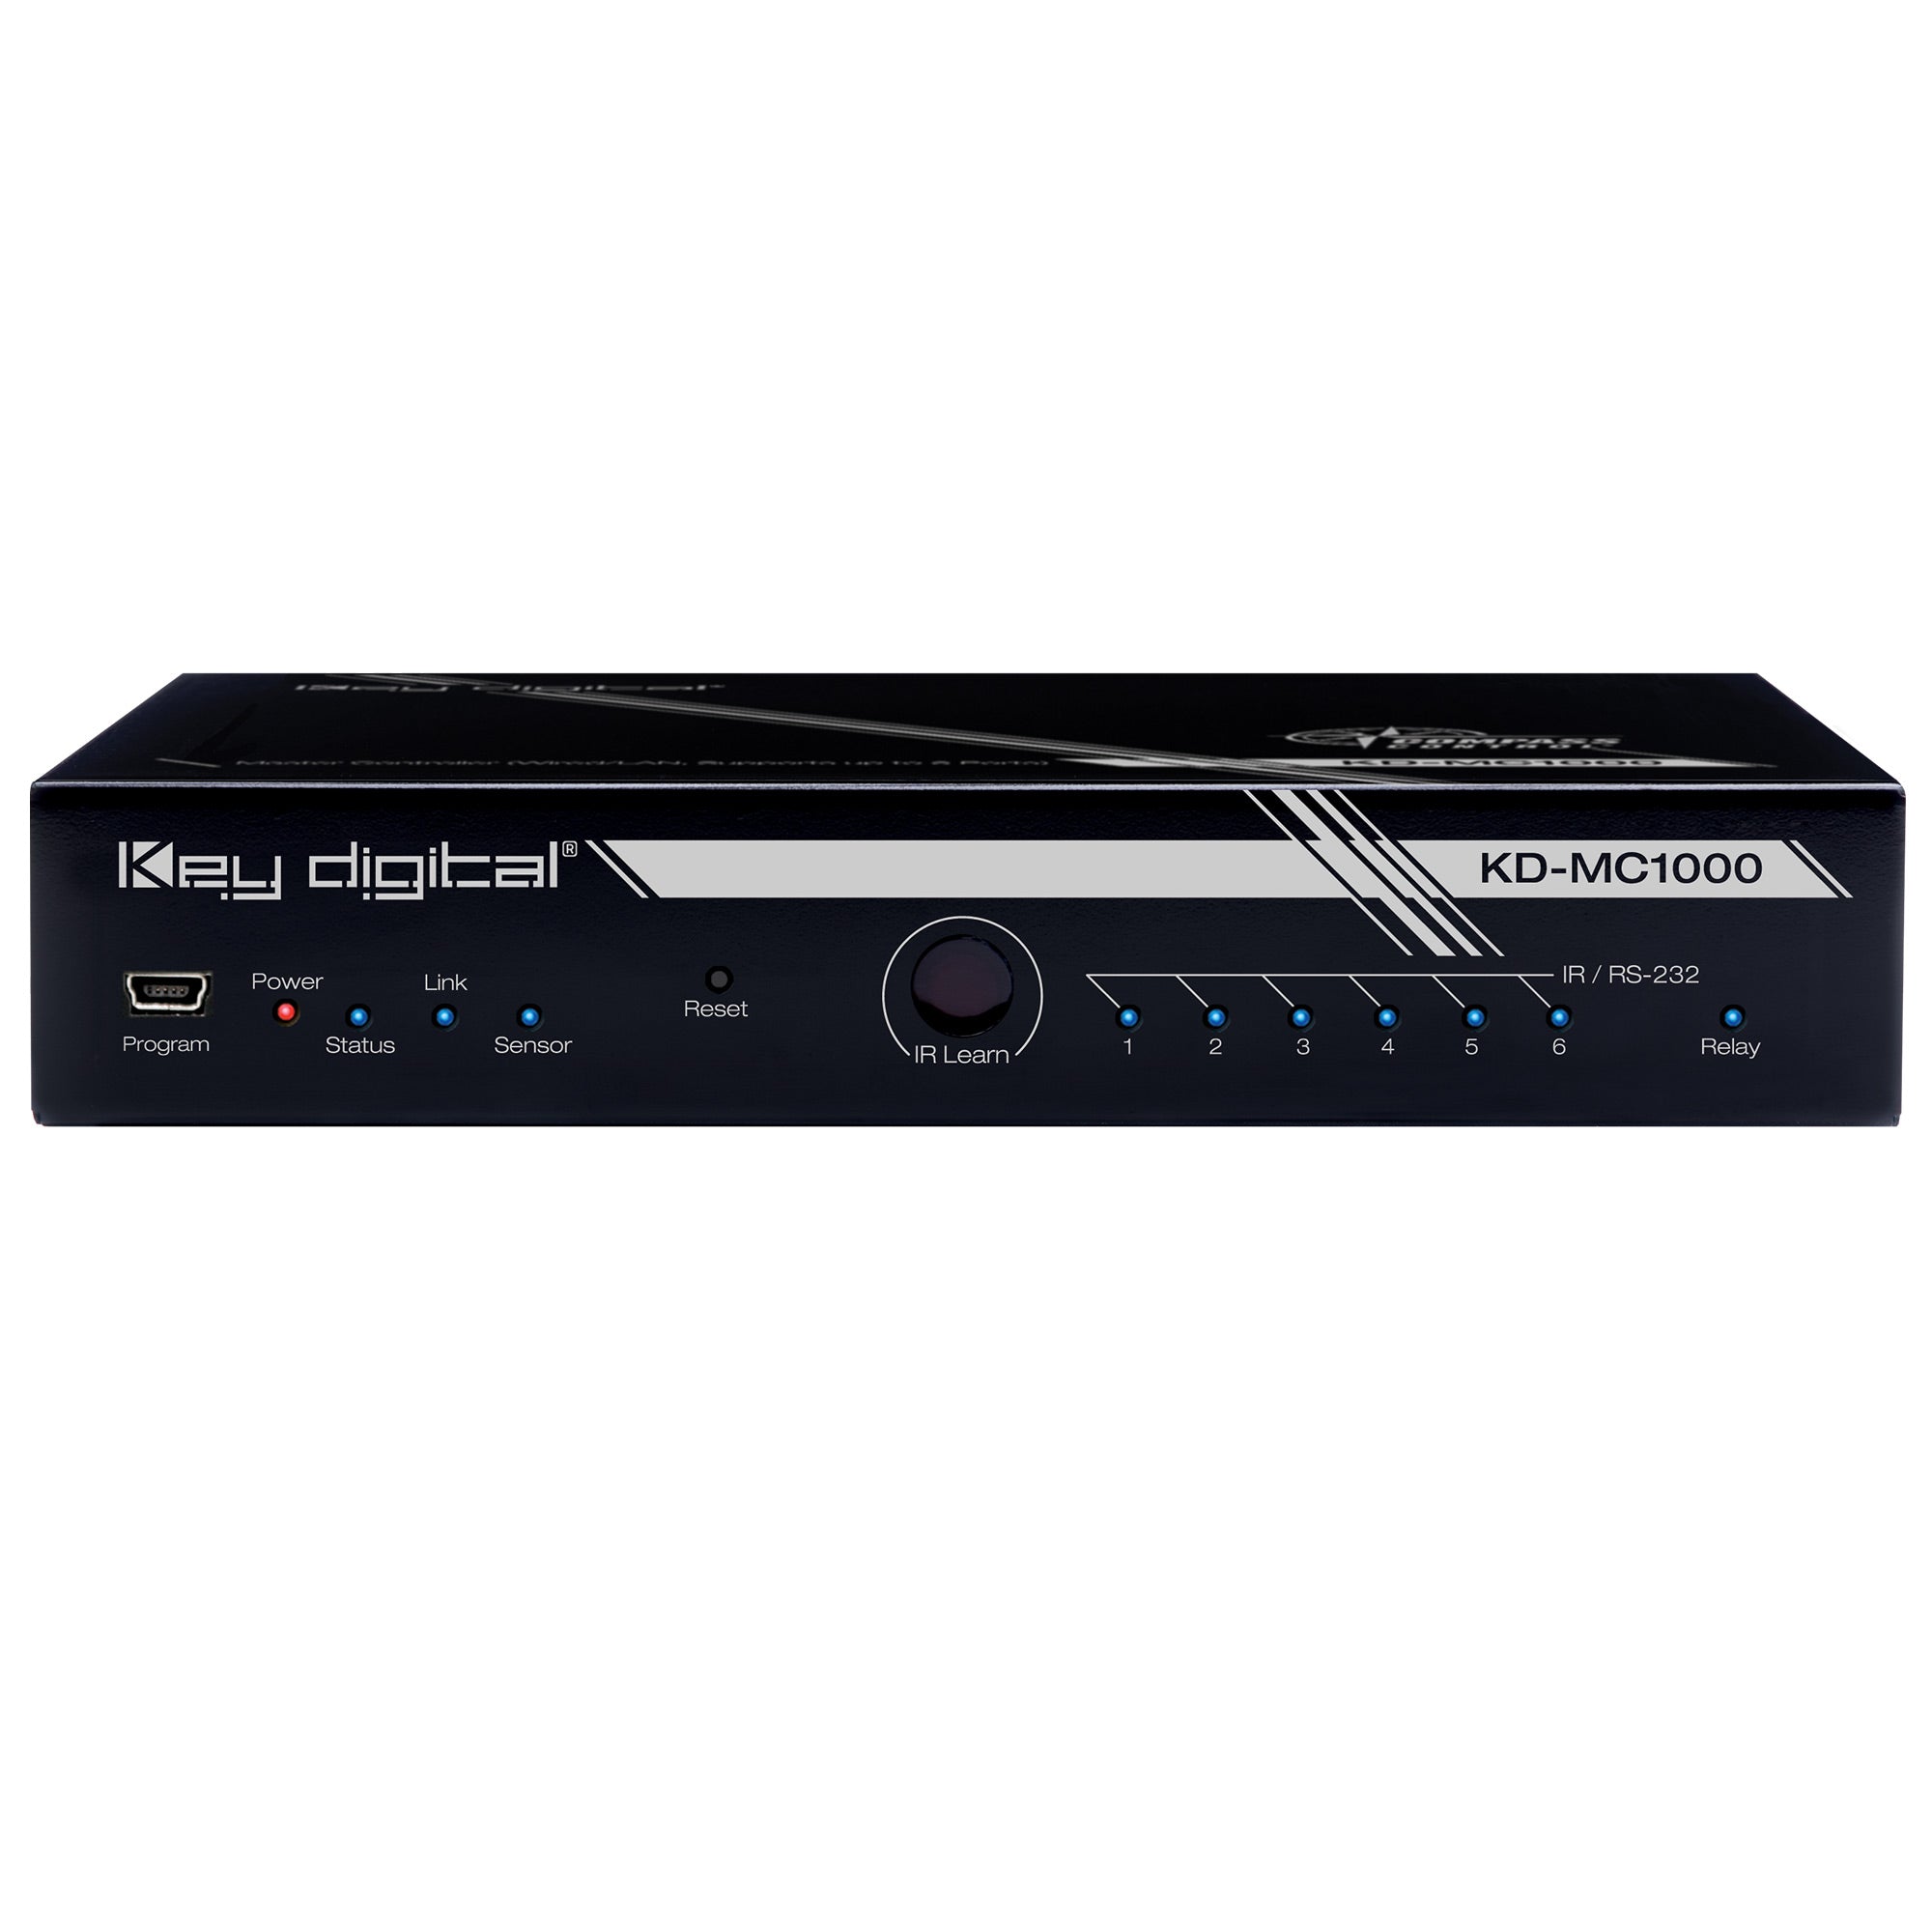 Key Digital Master Controller (Wired/LAN, Supports up to 8 Ports) - KD-MC1000